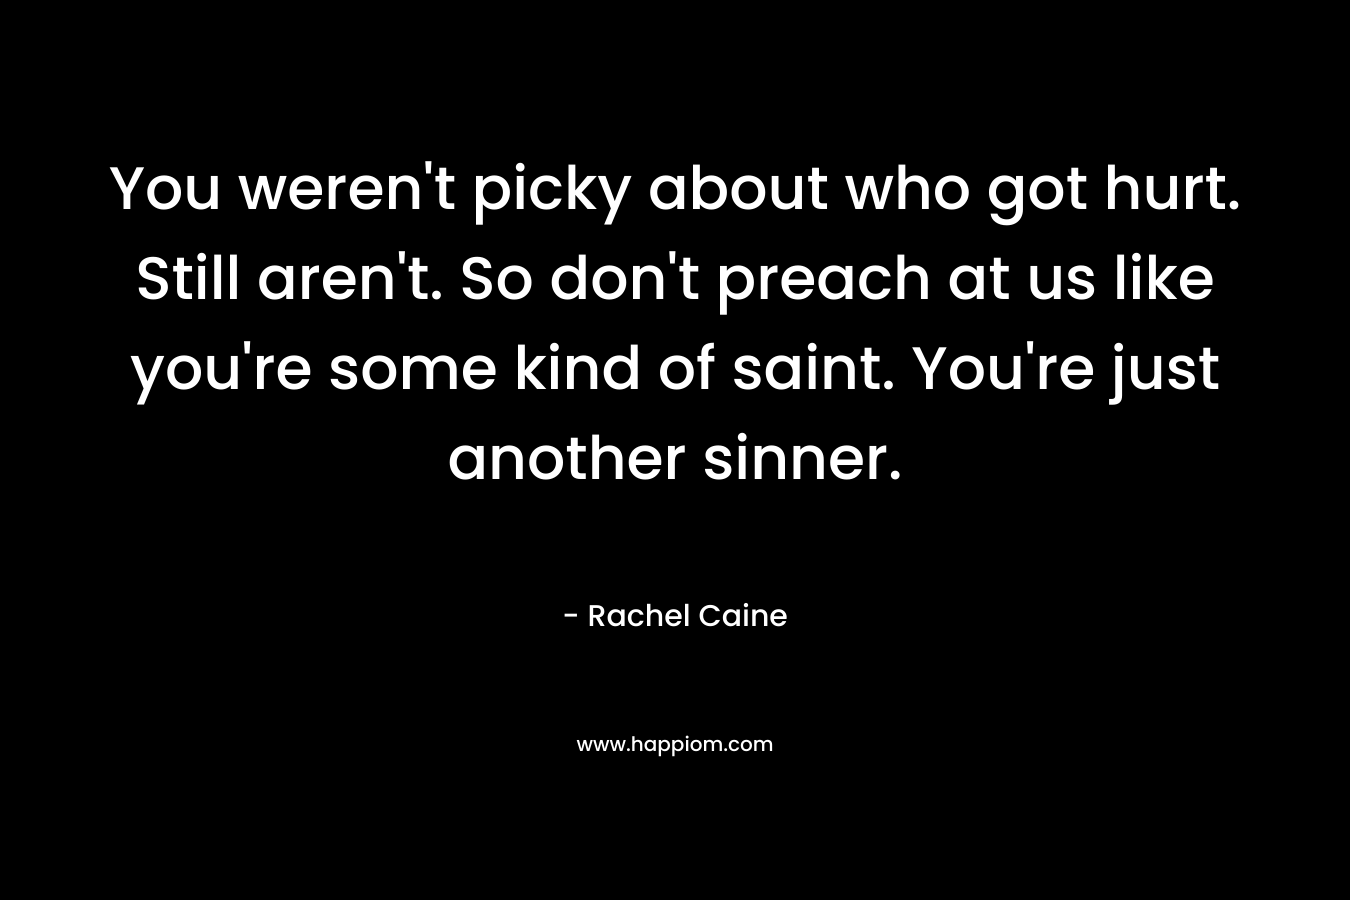 You weren’t picky about who got hurt. Still aren’t. So don’t preach at us like you’re some kind of saint. You’re just another sinner. – Rachel Caine